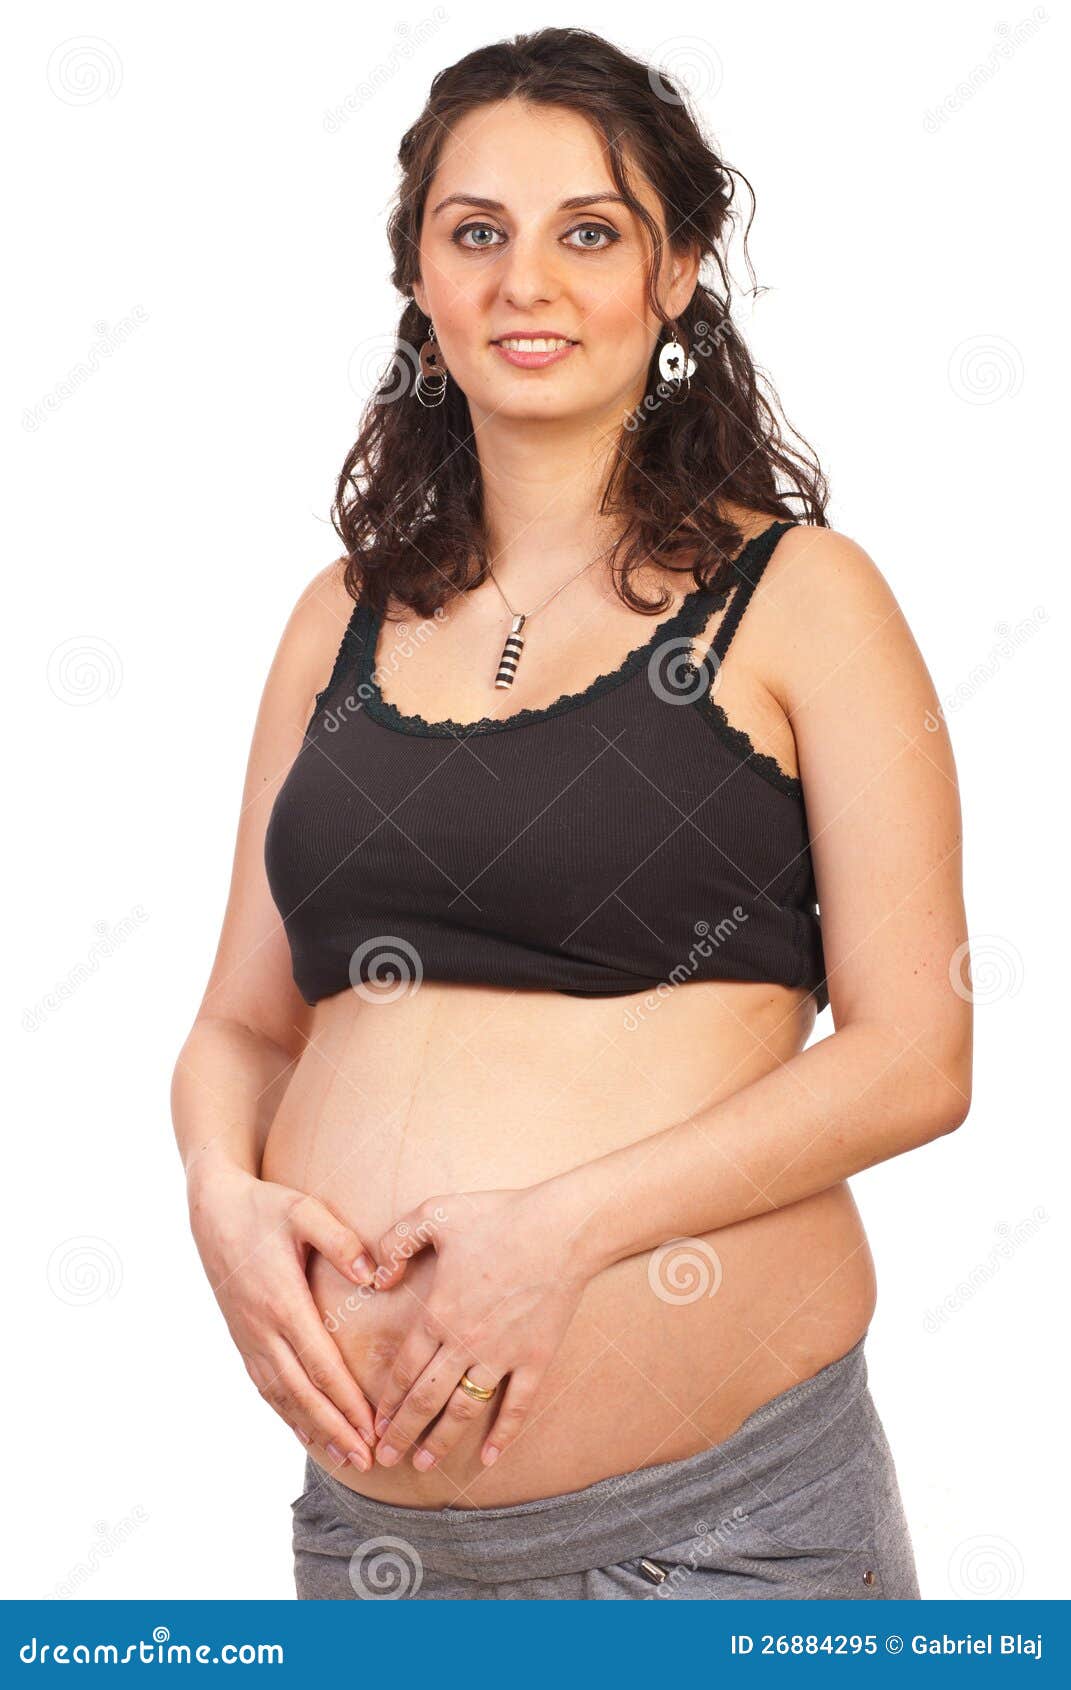 How To Make Women Pregnant 63